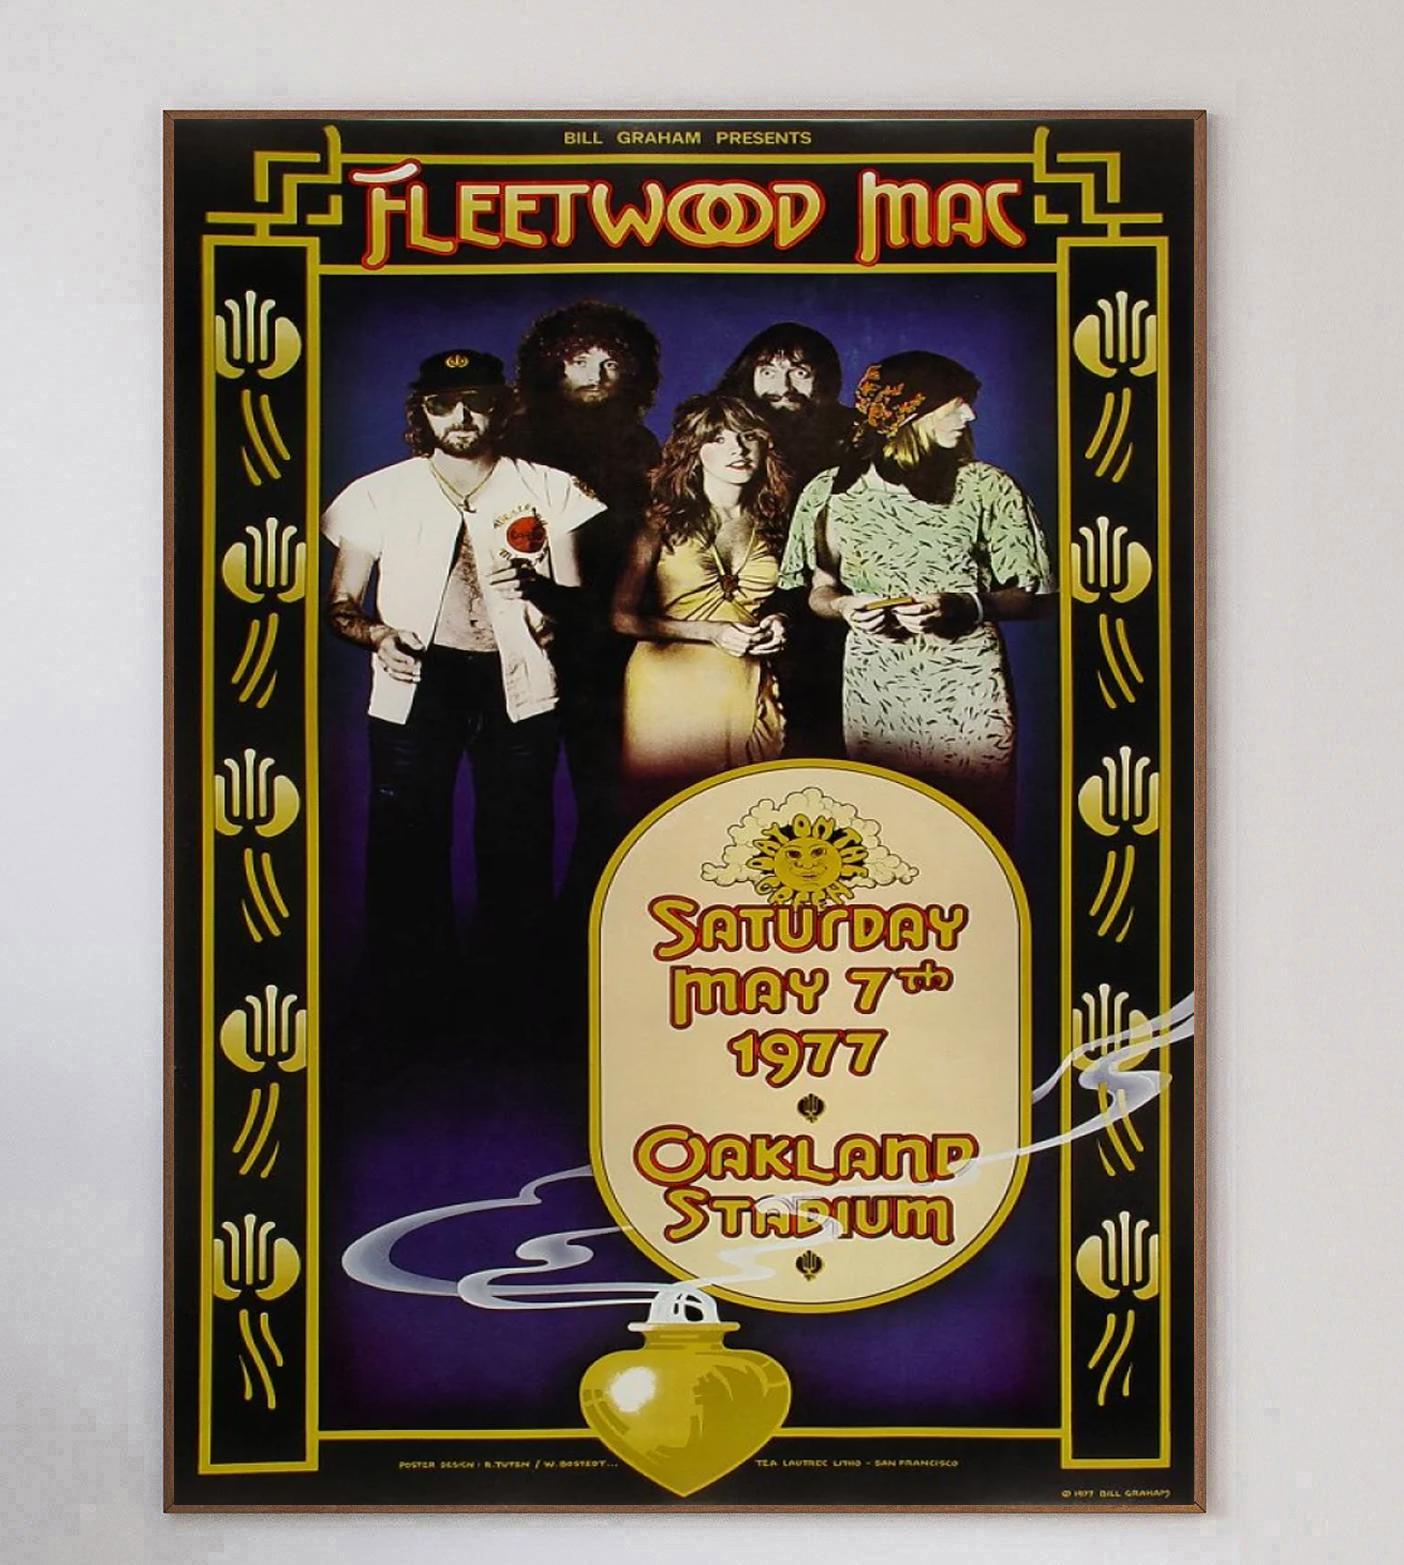 Designed by concert poster artist Randy Tuten and William Bodstedt, this beautiful poster was created in 1977 to promote a live concert of Fleetwood Mac at the world famous Oakland Coliseum in California. Bill Graham events such as this were well